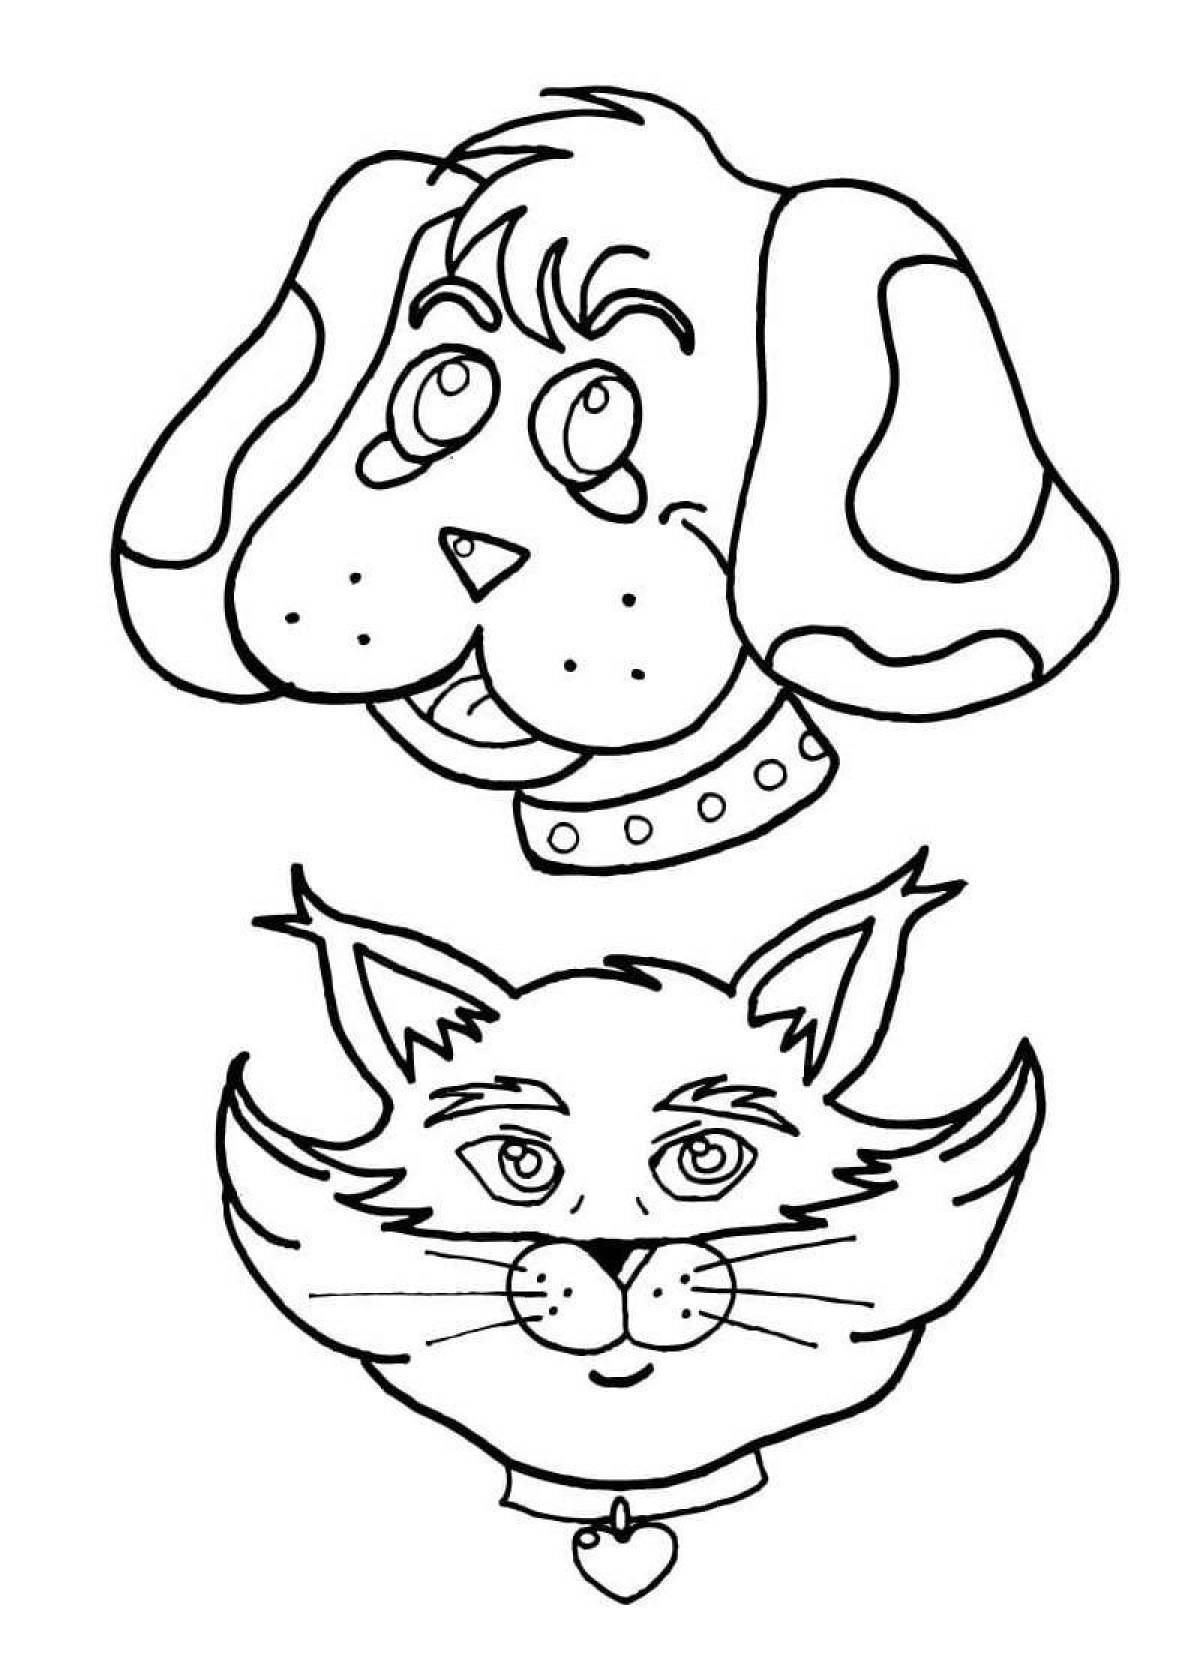 Wiggly animal cat and dog coloring page